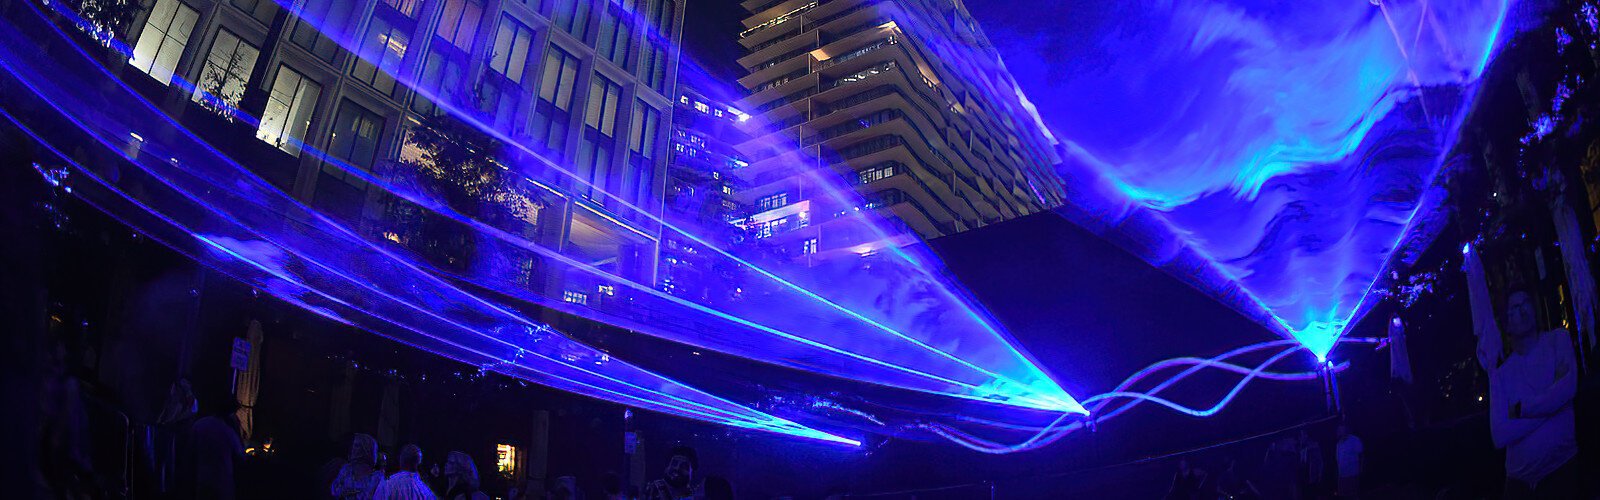 The wave-like layer of blue light moving above the crowd is meant to evoke thoughts about rising sea levels and the need to adapt to the changing environment.